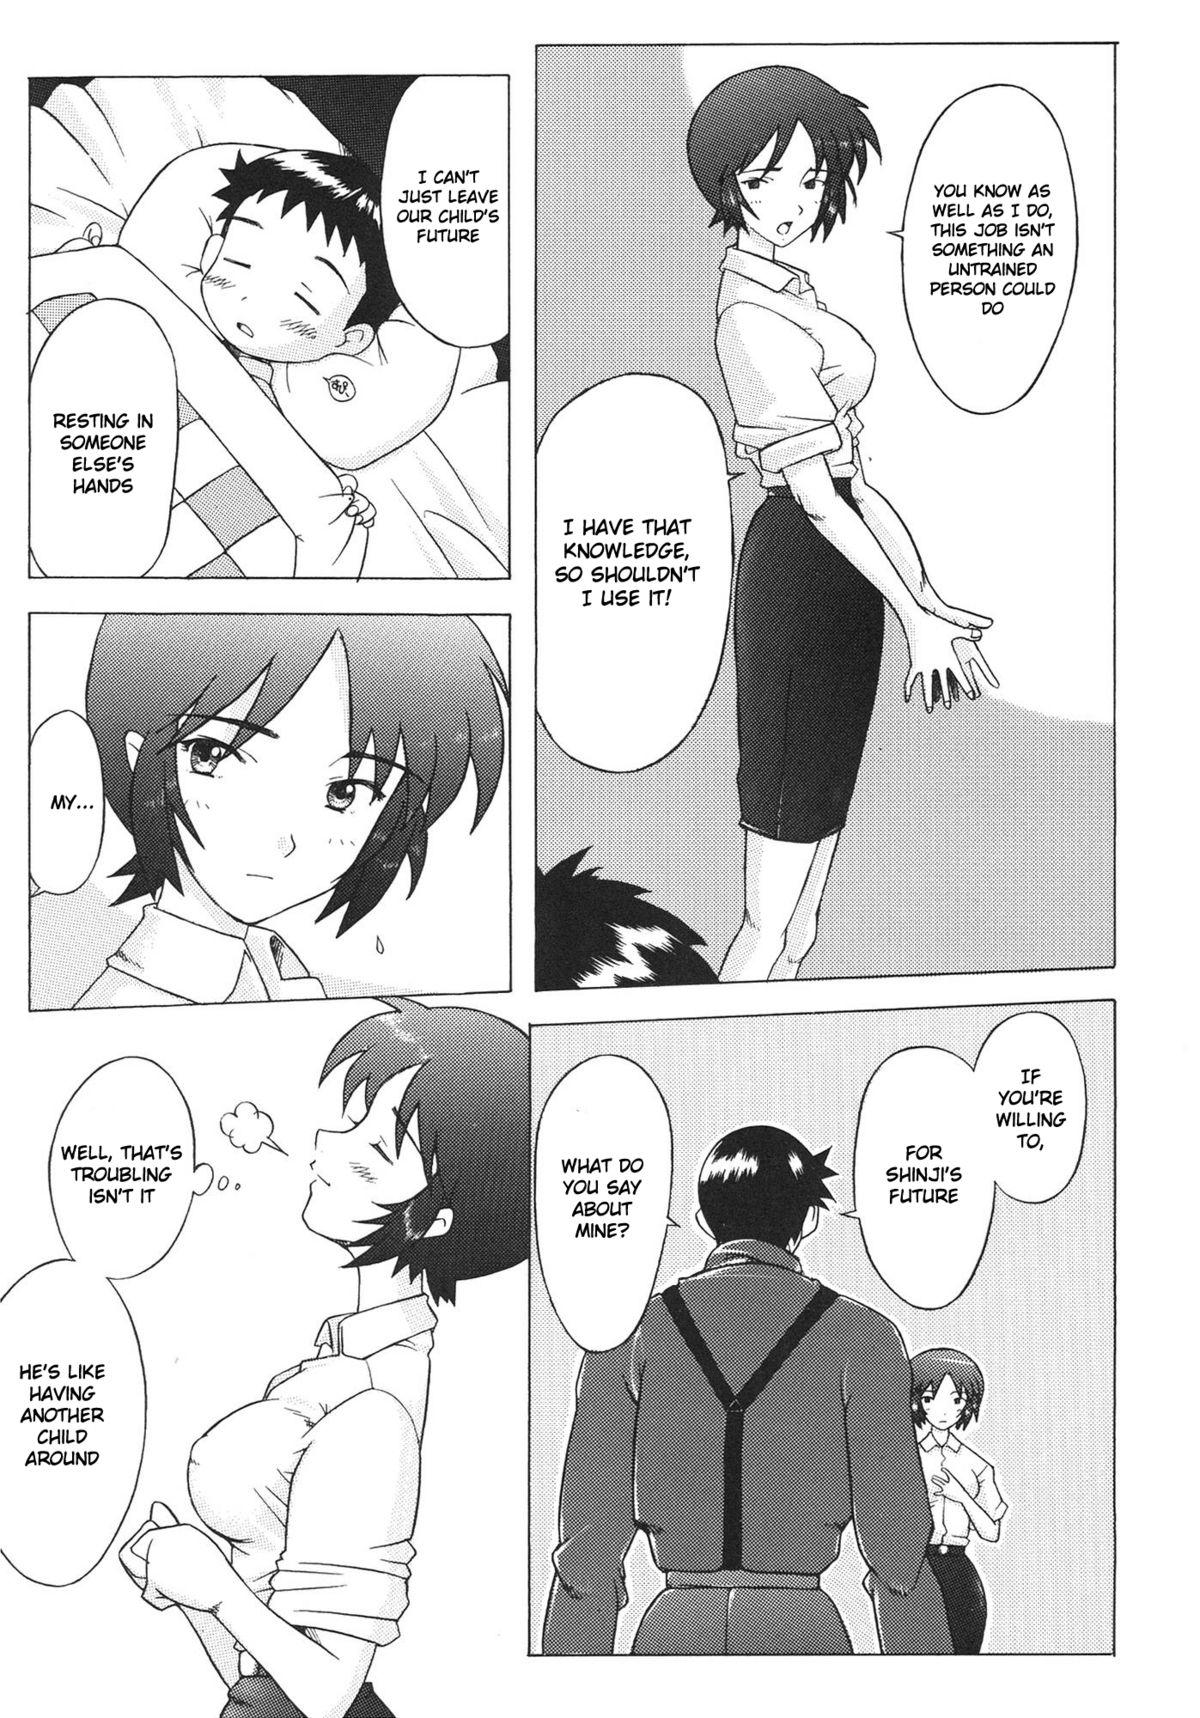 Stripping Eden - Neon genesis evangelion Old Vs Young - Page 6